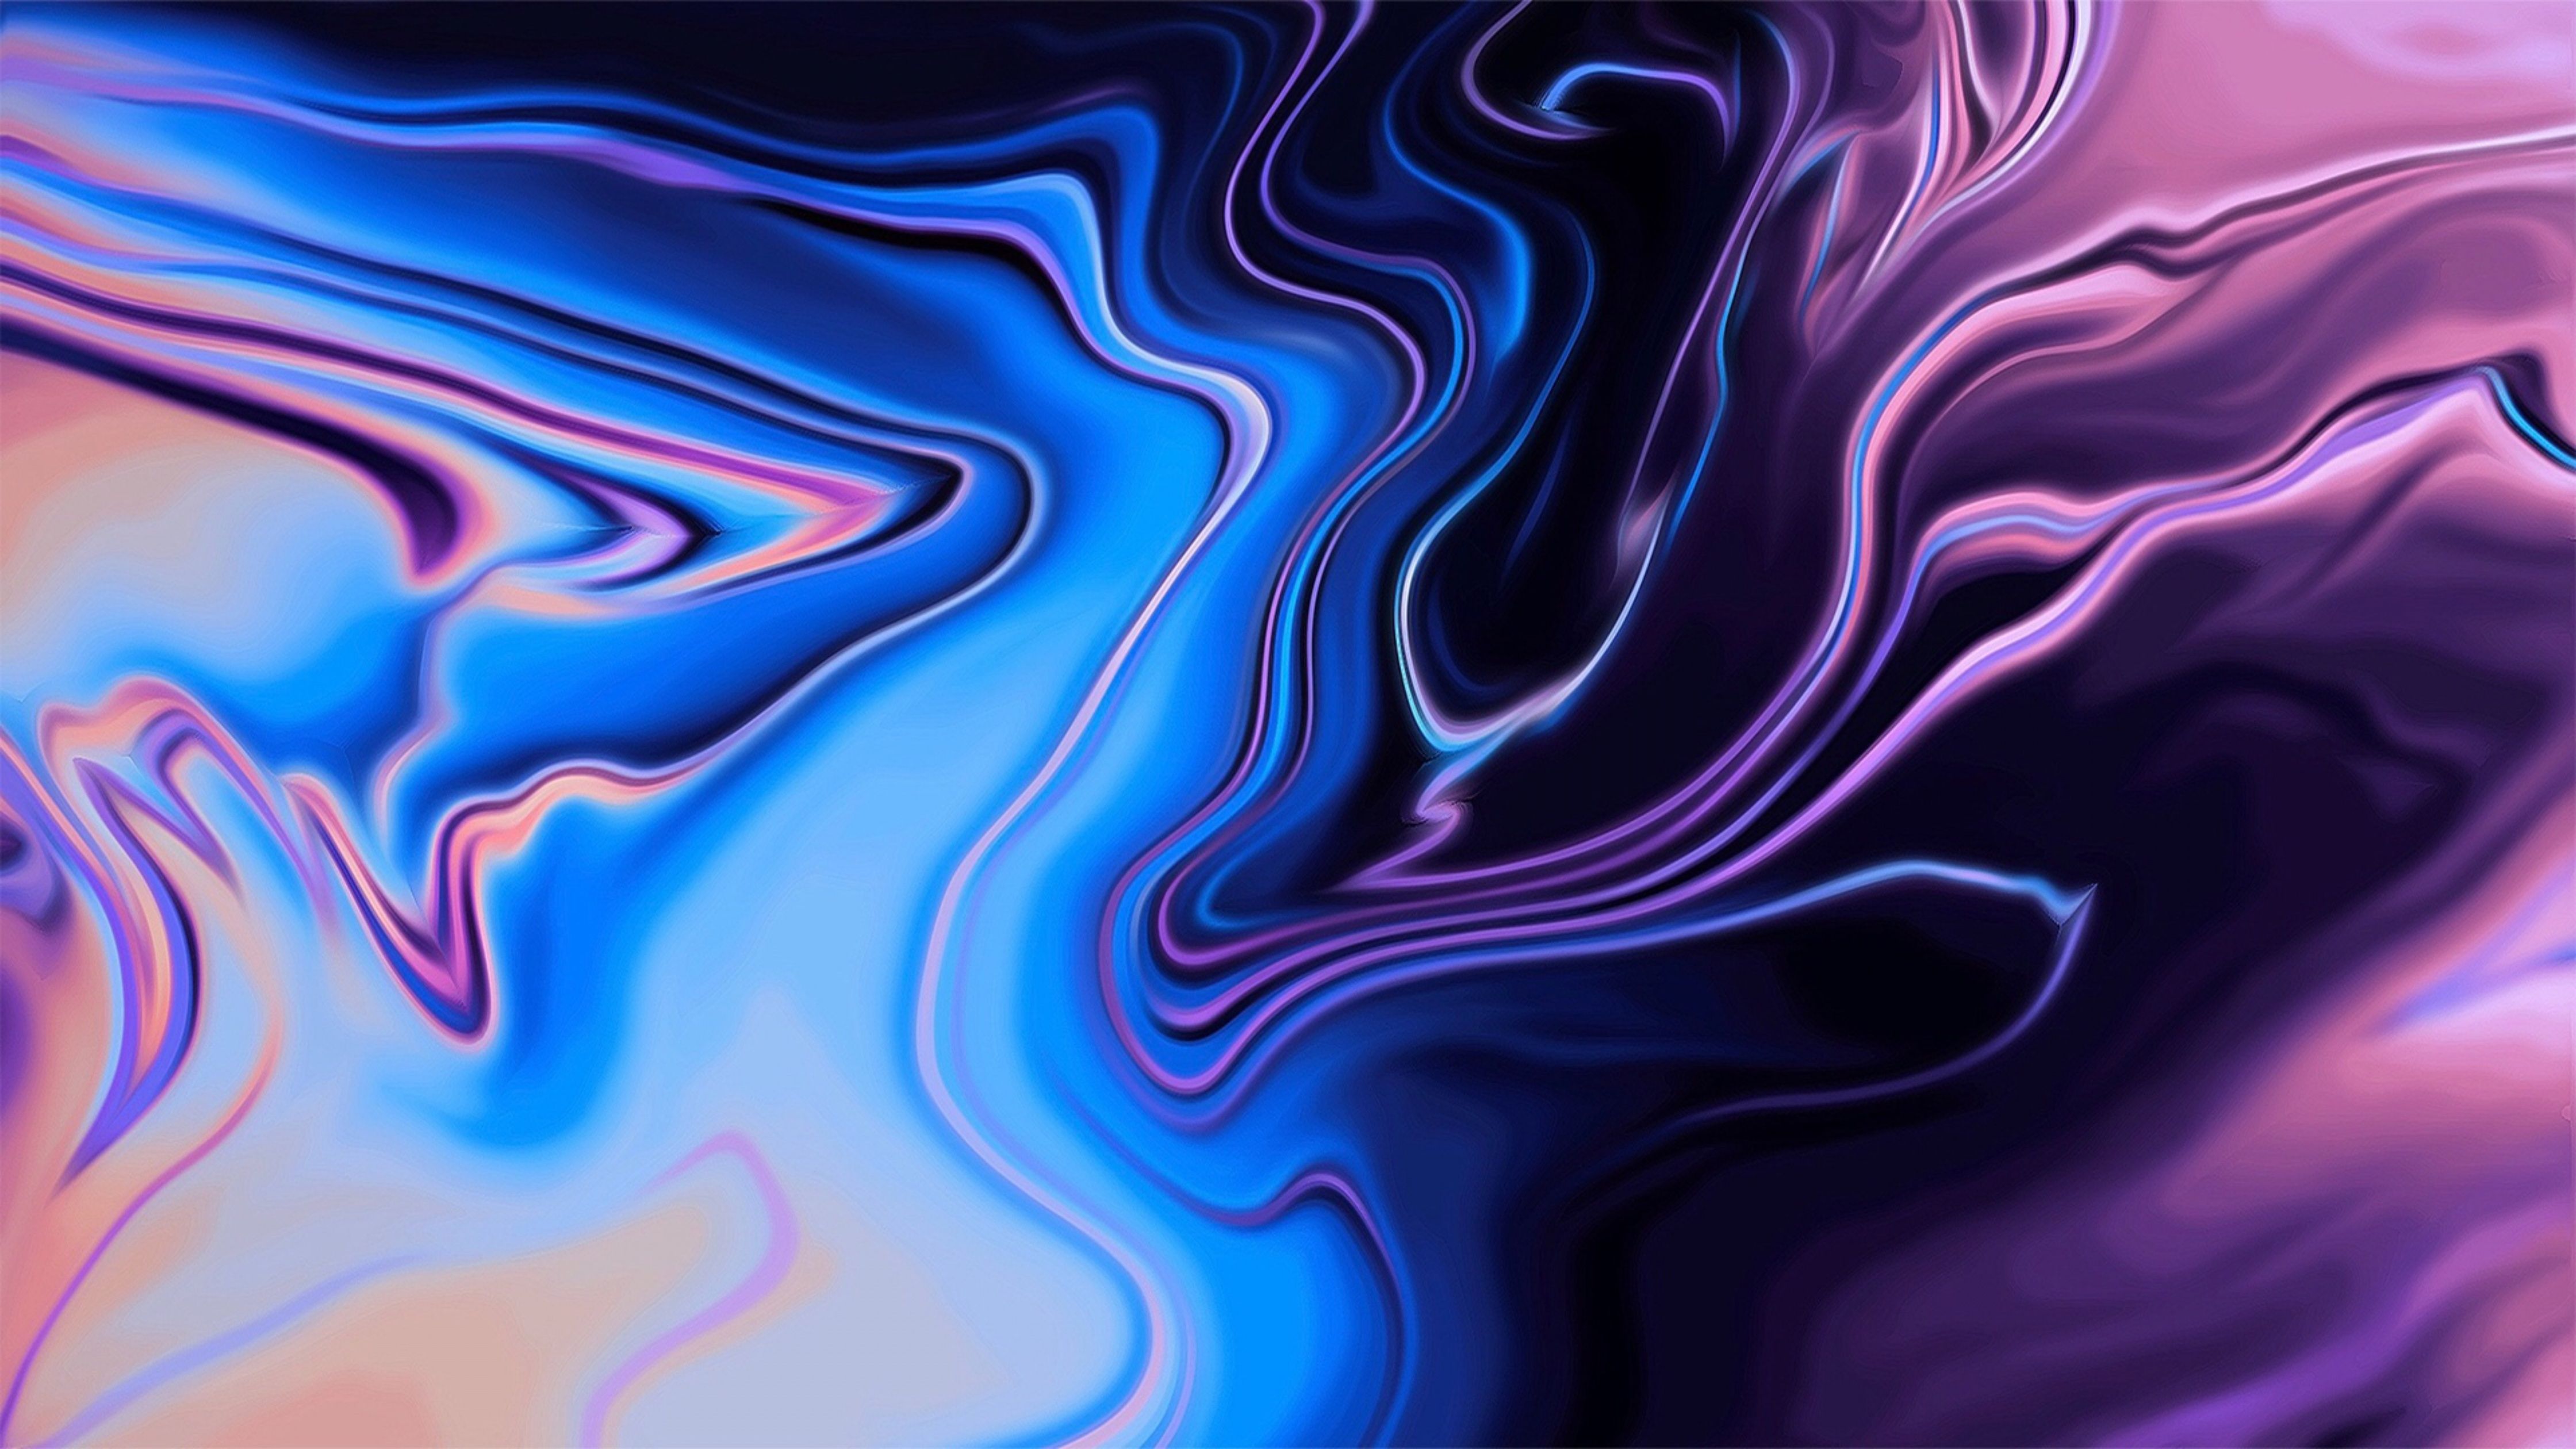 A colorful abstract artwork with blue, purple and pink - MacBook